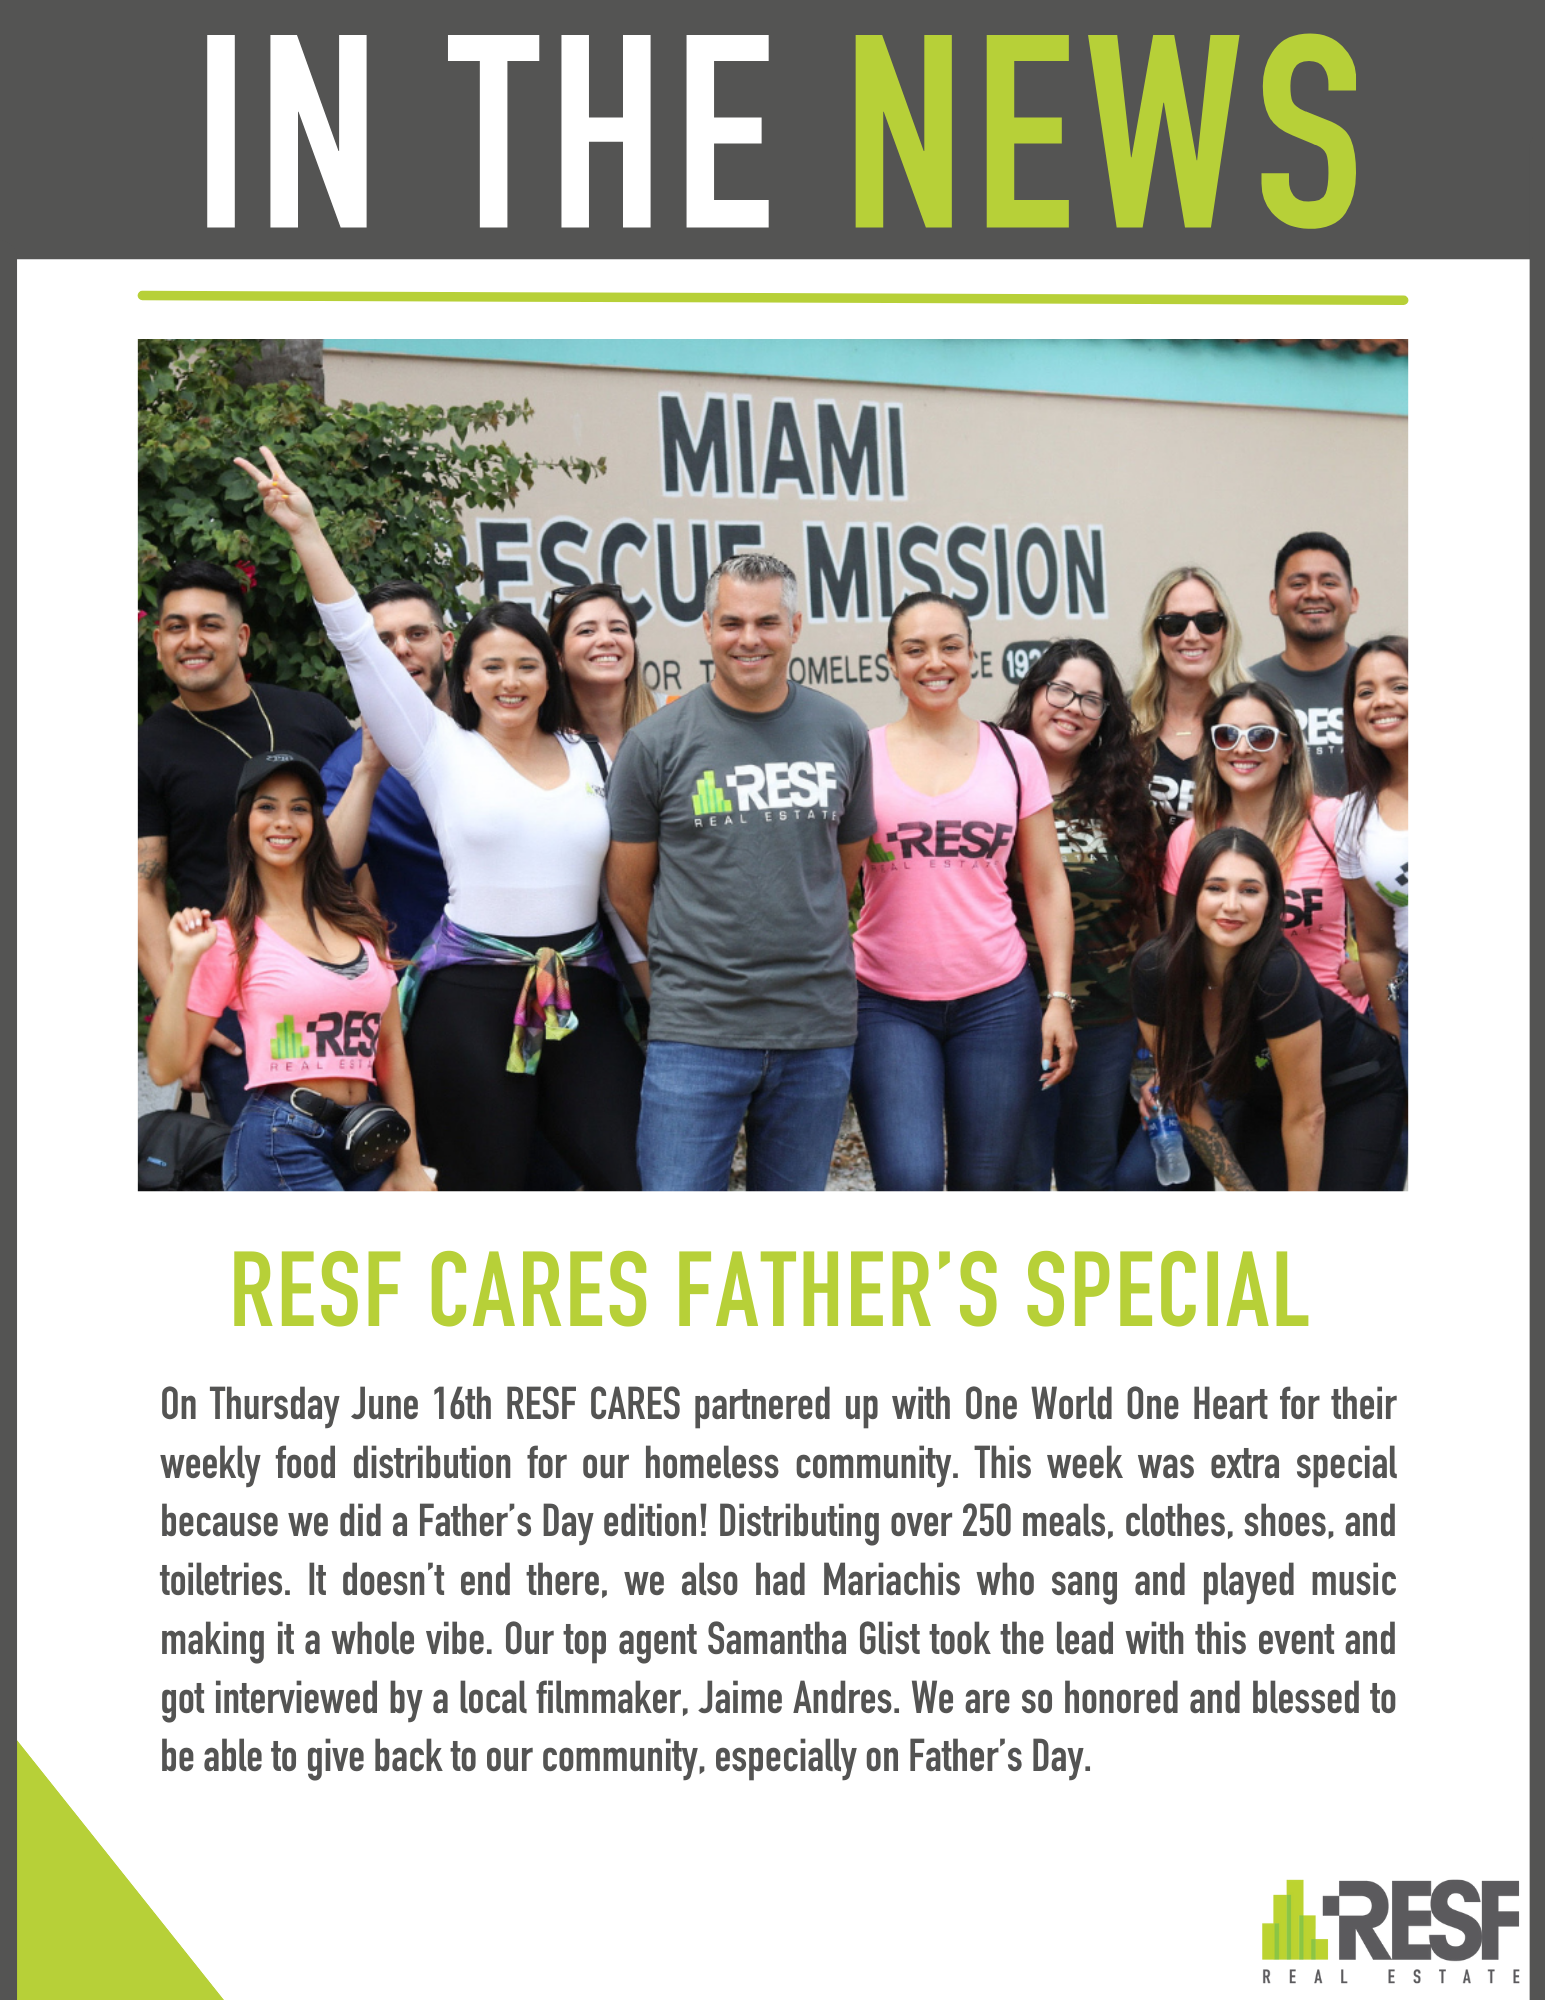 RESF CARES FATHER’S SPECIAL